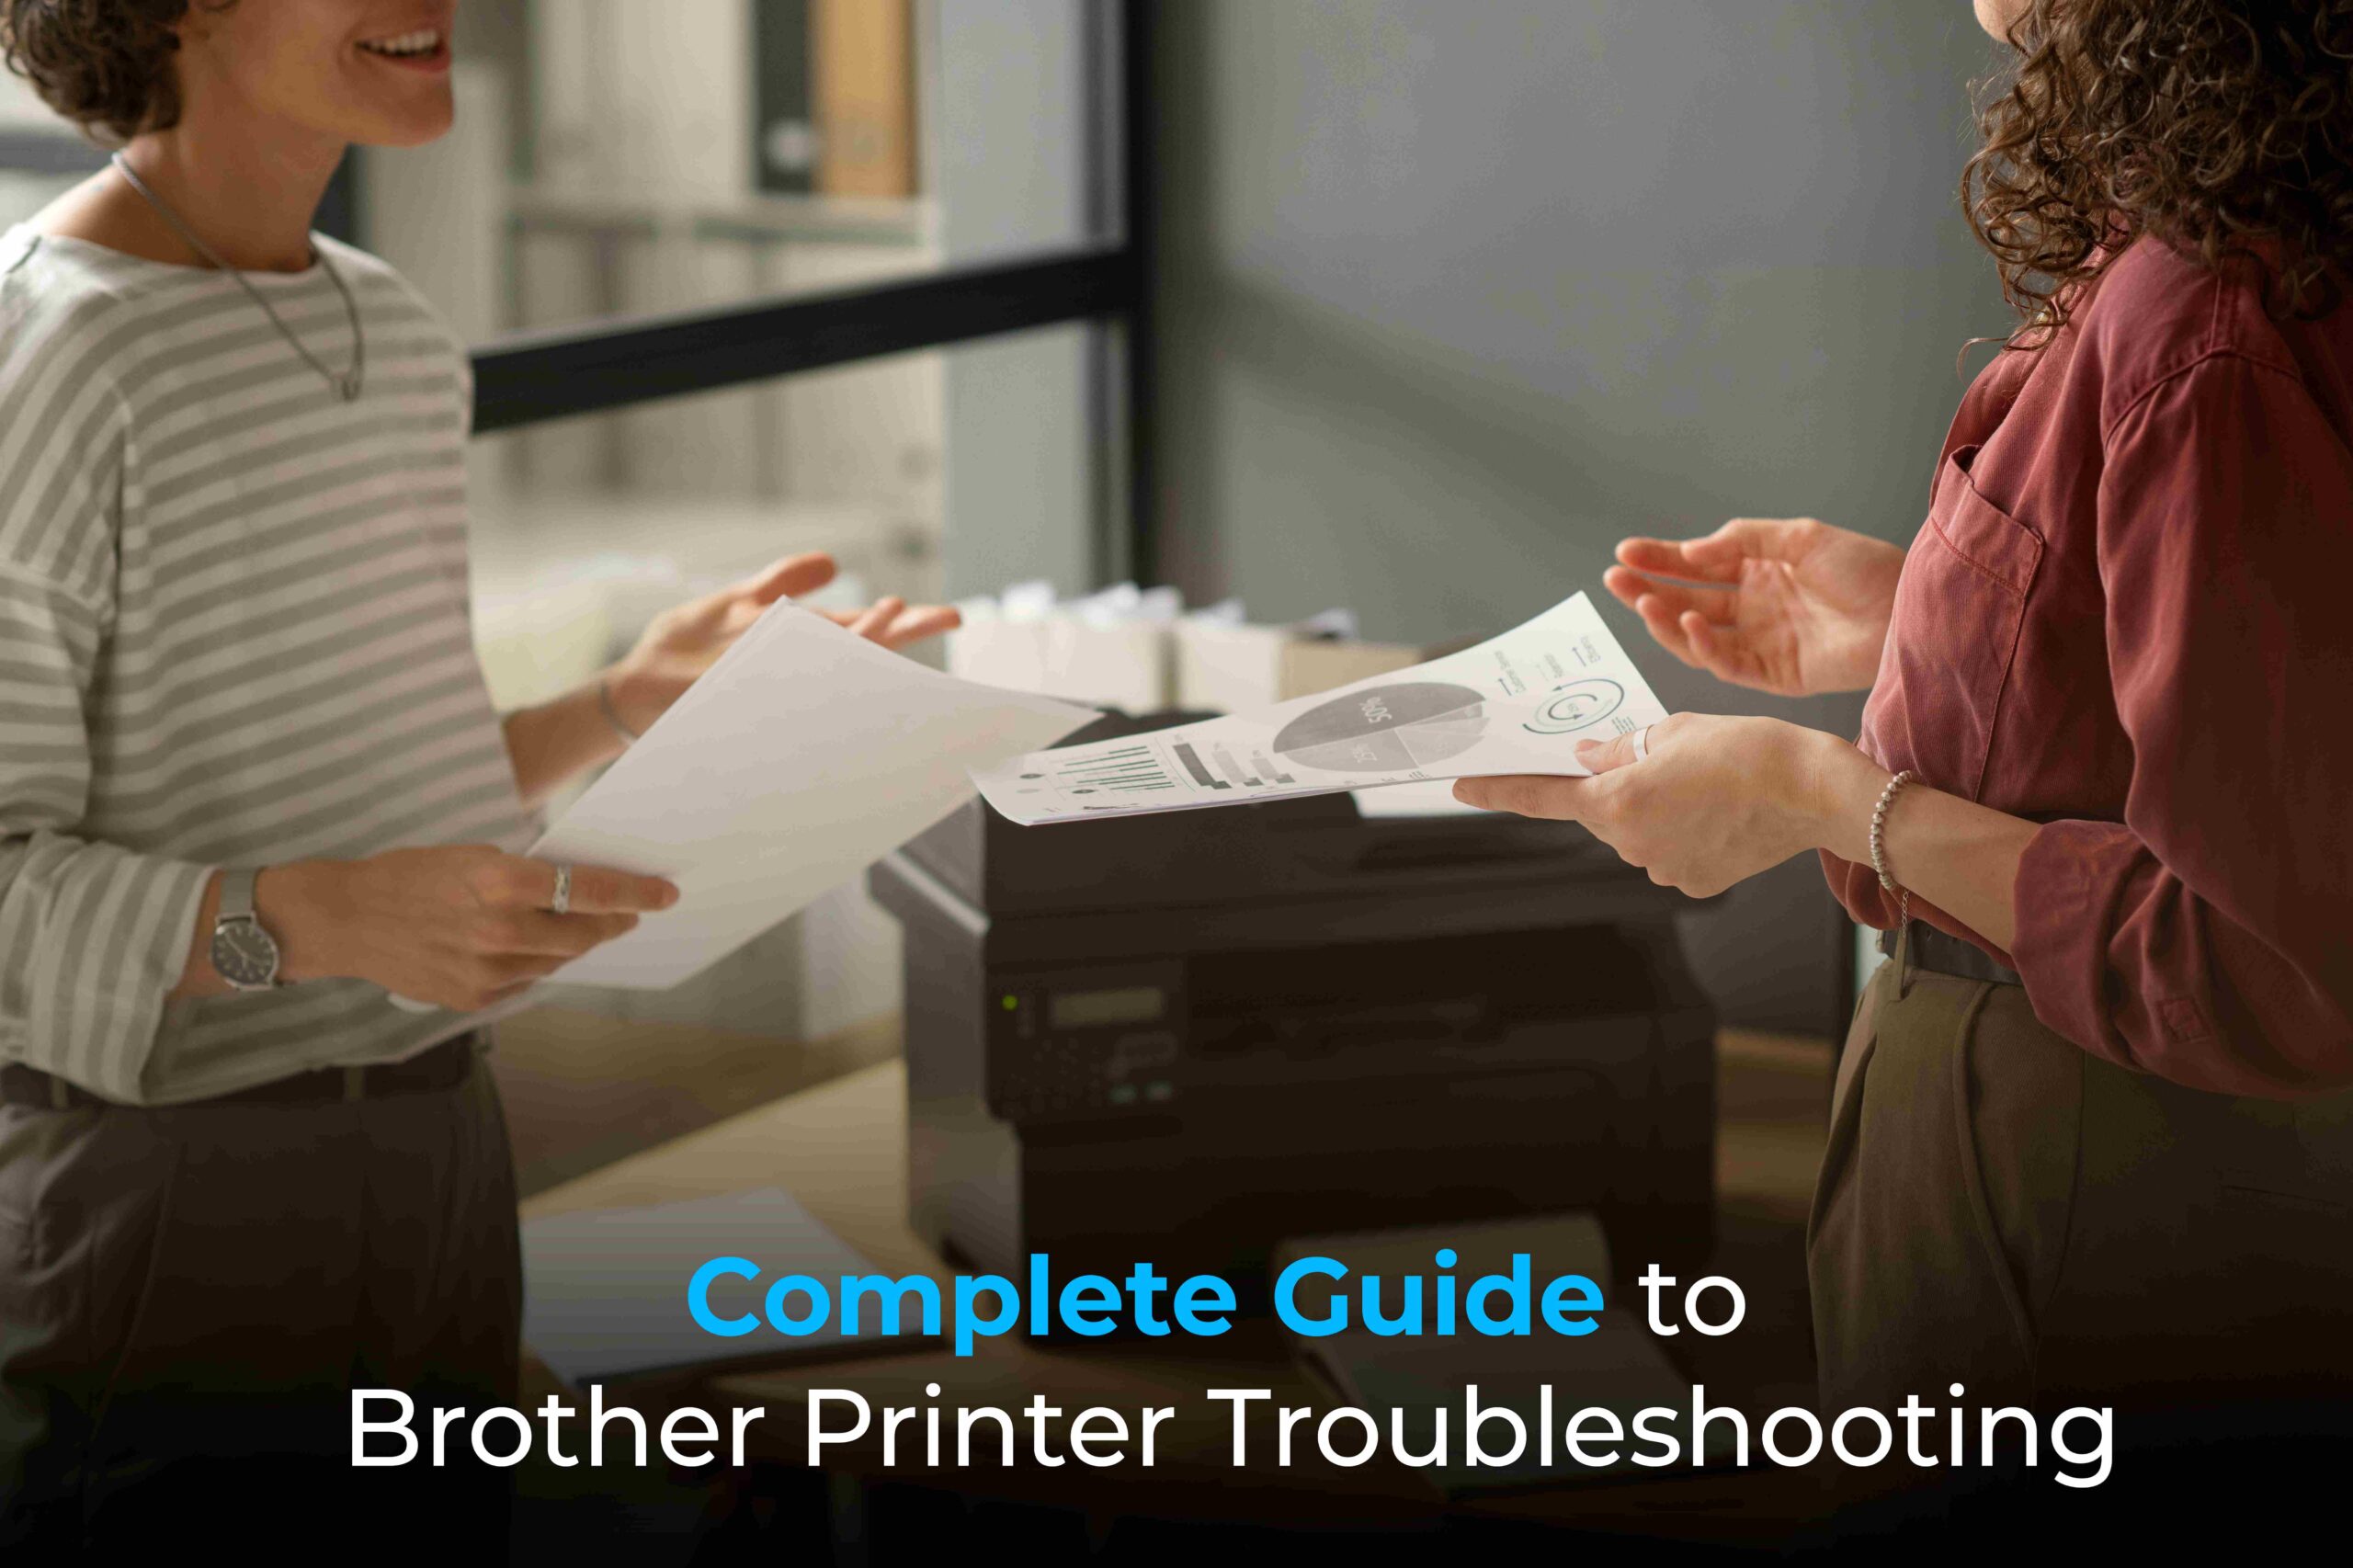 Complete Guide to Brother Printer Troubleshooting